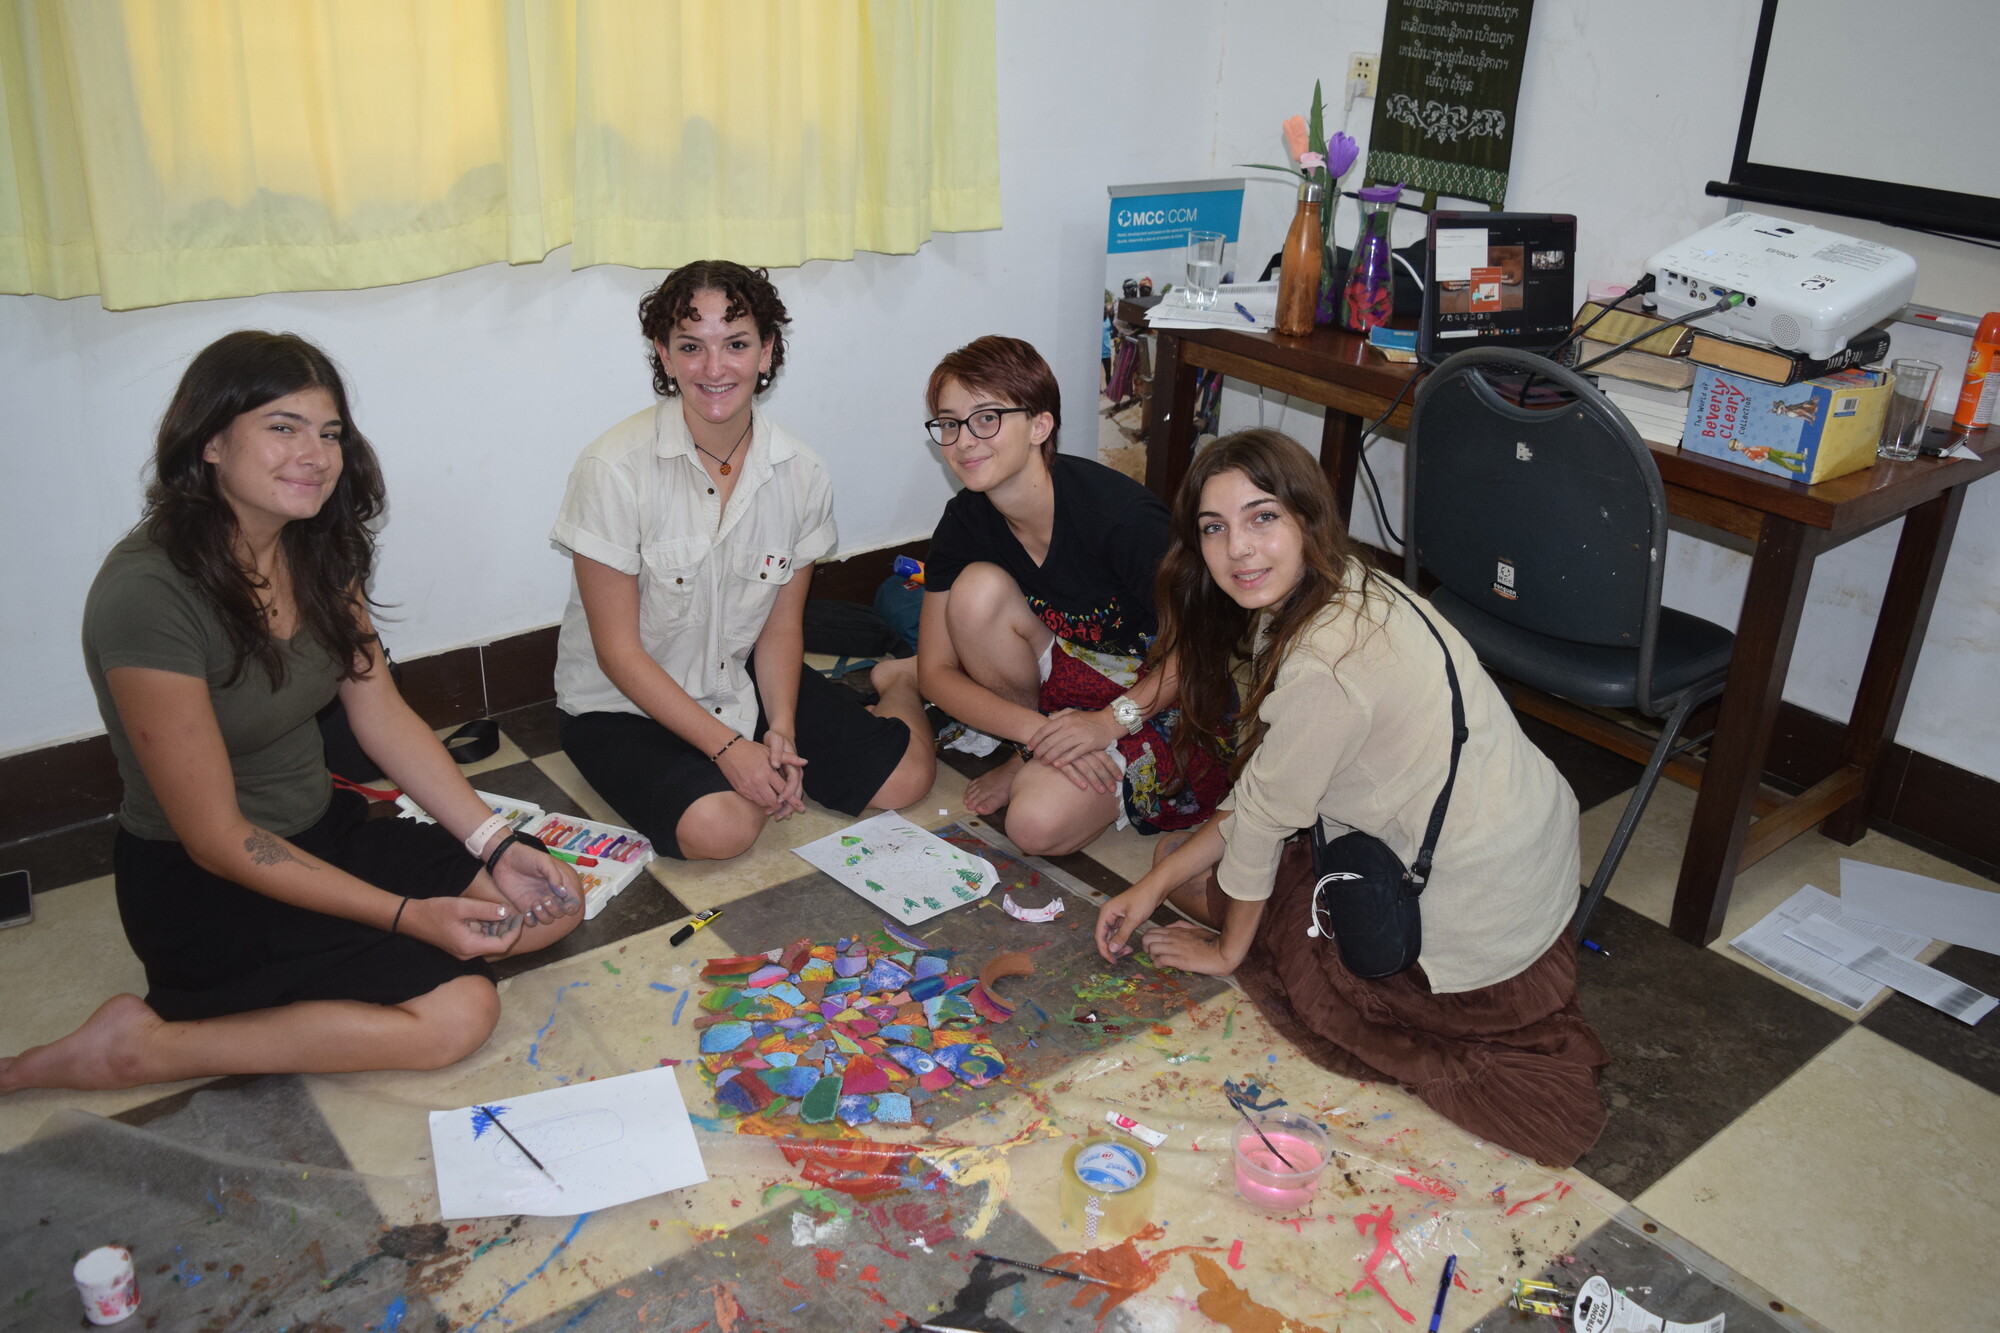 Four individuals are seated on the floor, surrounded by art supplies and colorful paper cutouts. They appear engaged in a creative activity, smiling at the camera in a room with a casual setting.